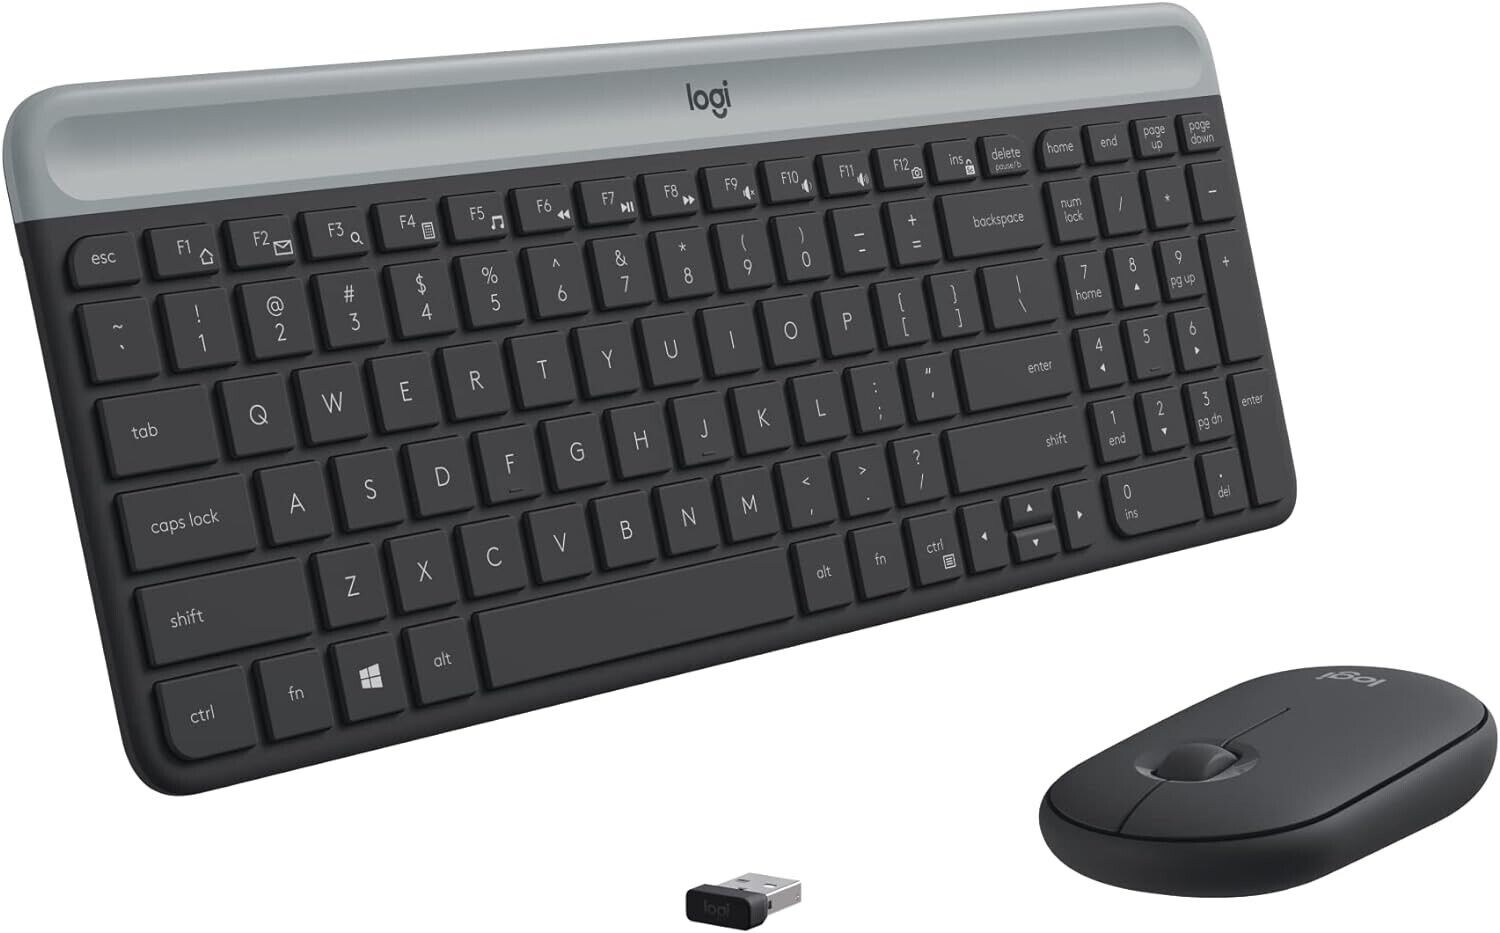 Logitech MK470 Slim Wireless Keyboard and Mouse Combo for Windows PC  - Graphite